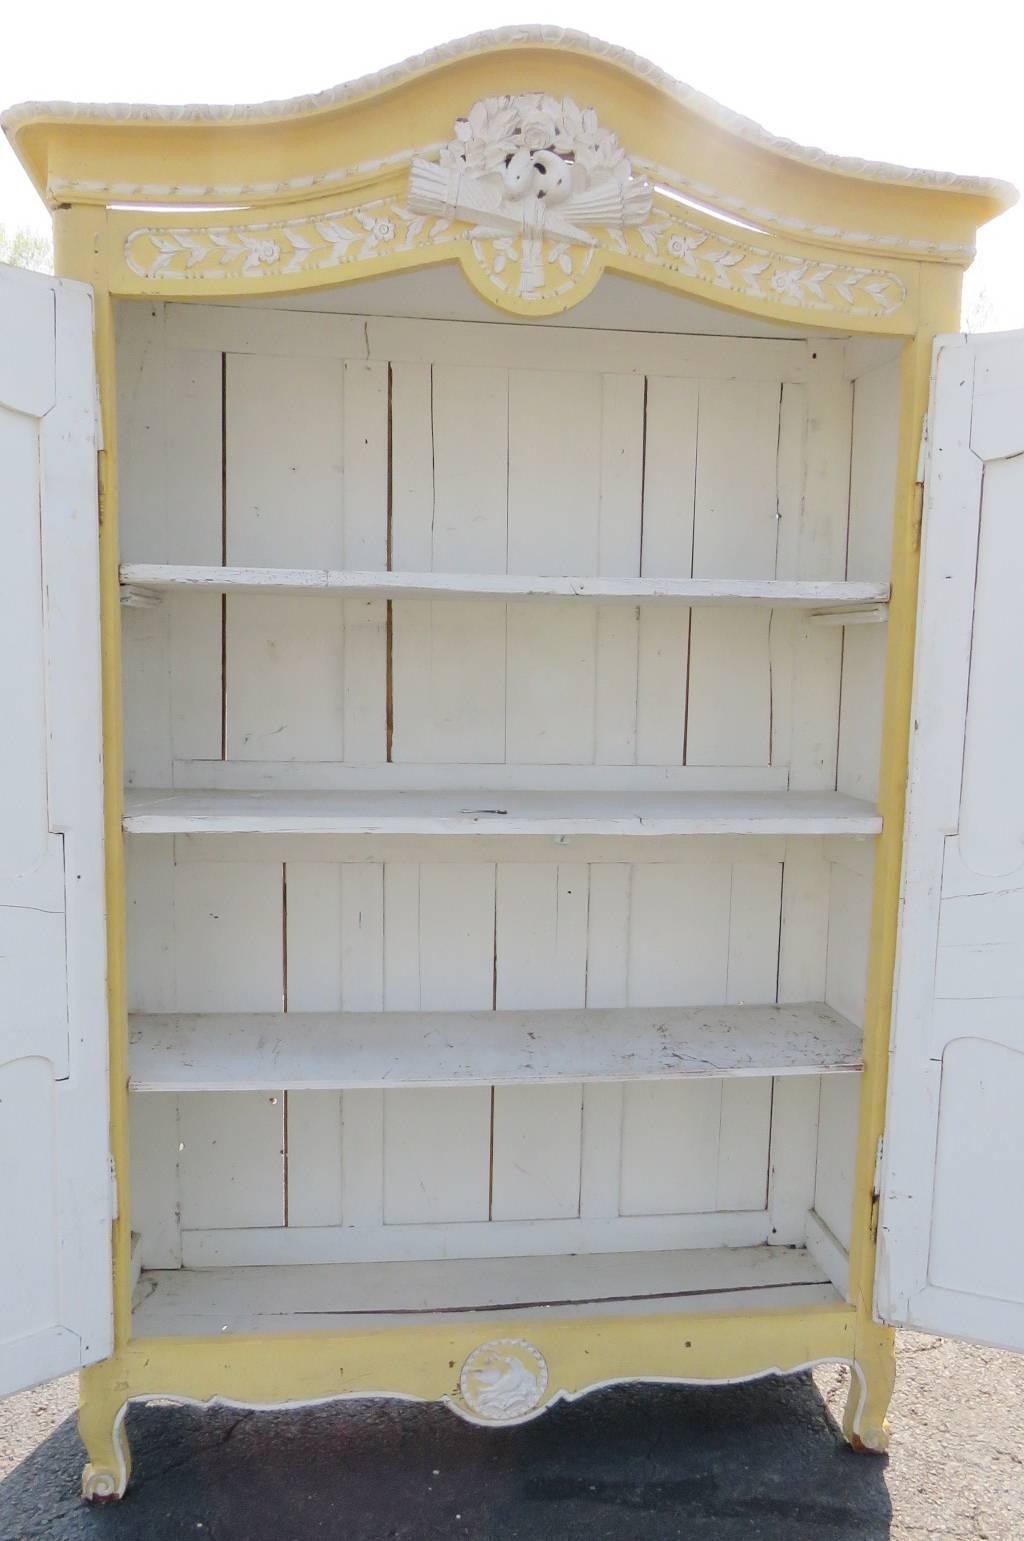 Yellow and white distressed painted frame with floral decoration. Inside has white painted shelves for storage.